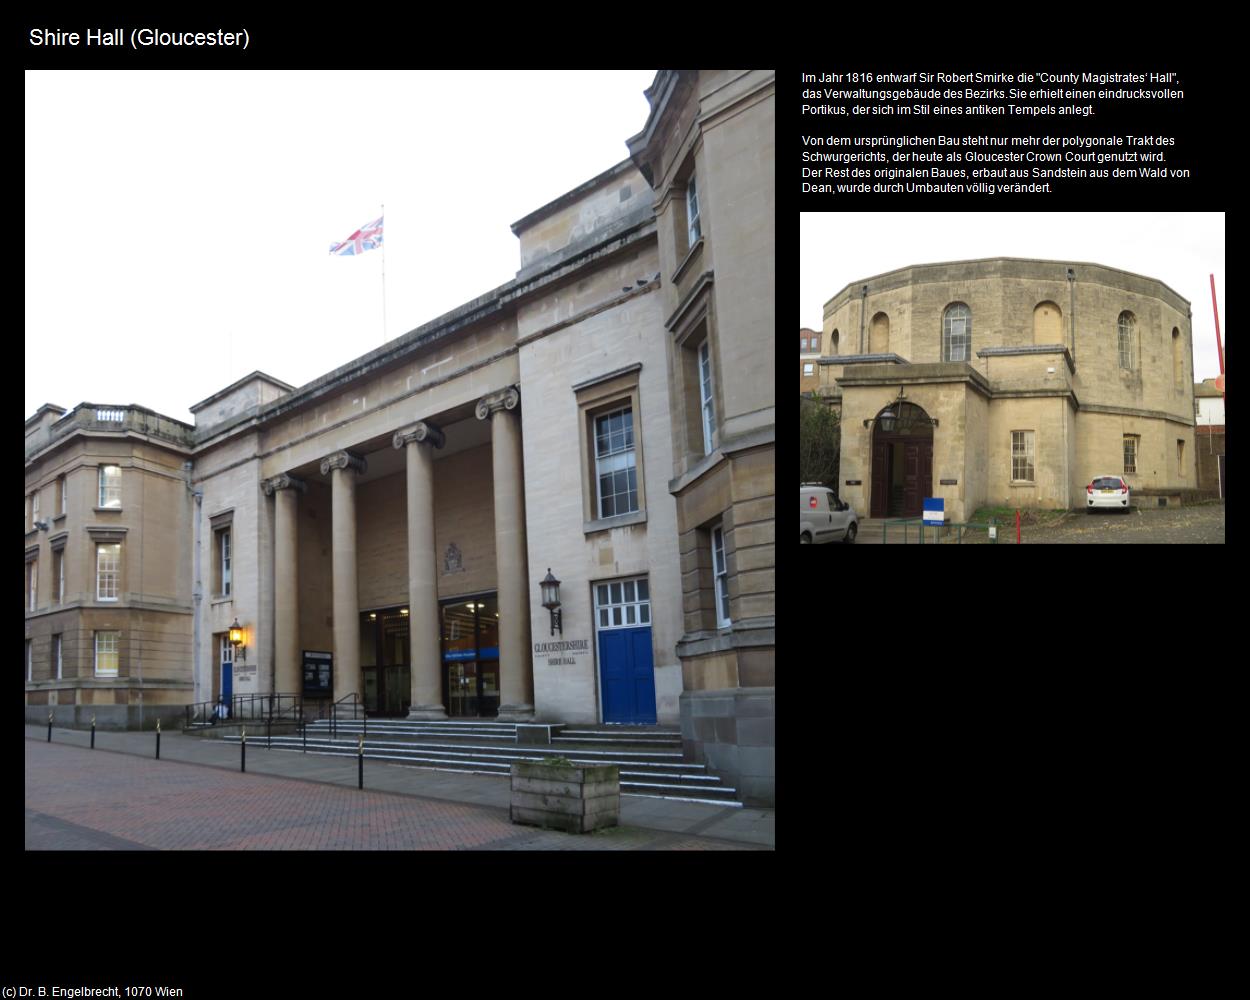 Shire Hall (Gloucester, England) in Kulturatlas-ENGLAND und WALES